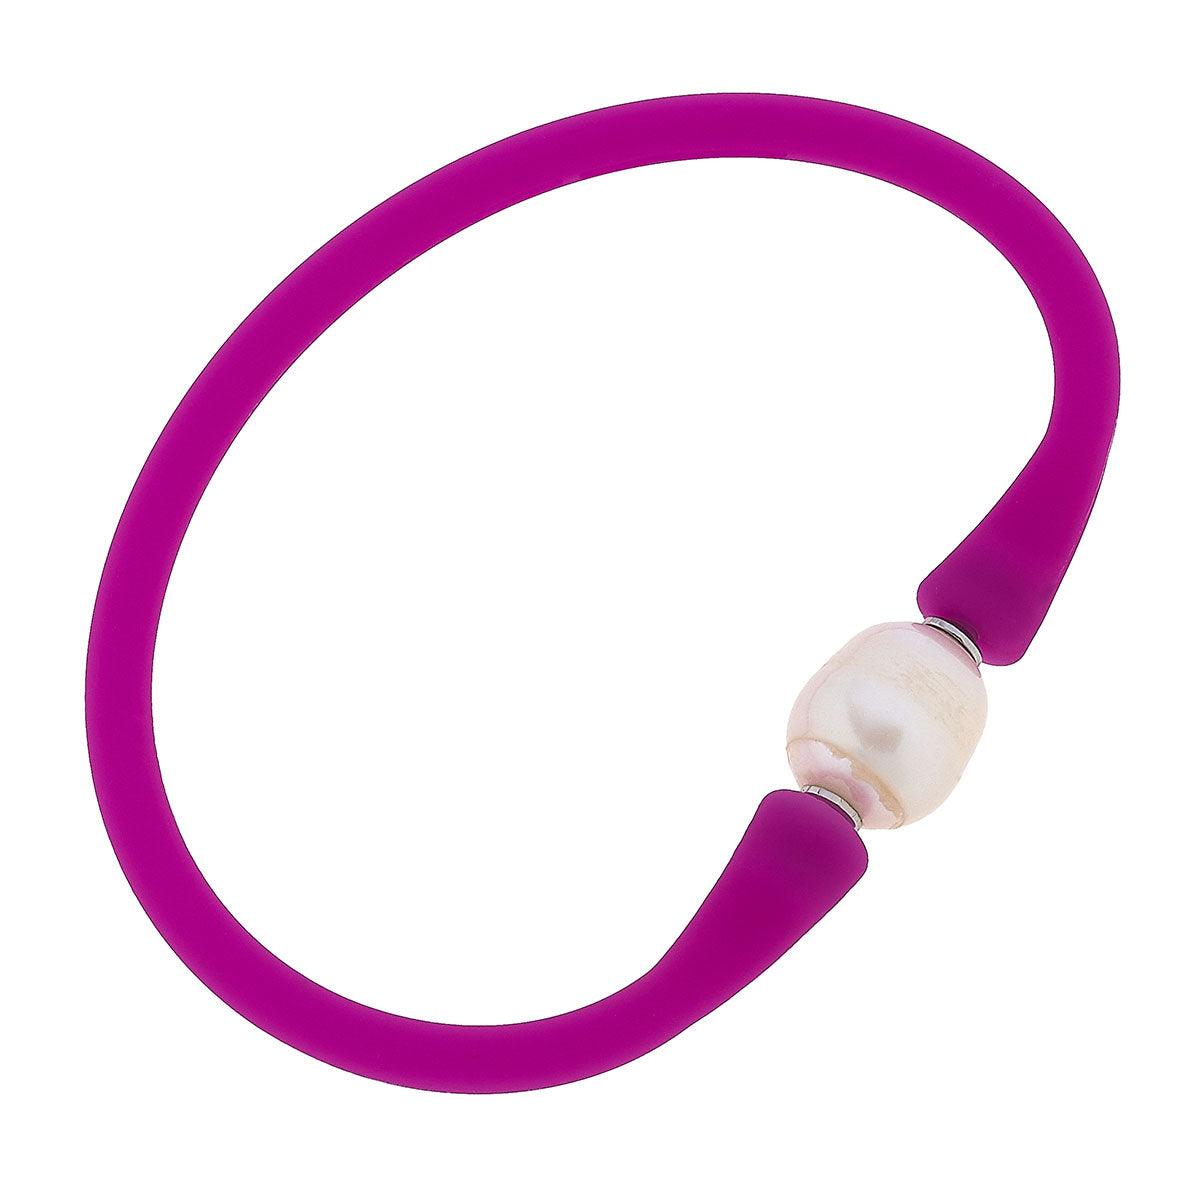 Magenta silicone bracelet with a small pearl bead